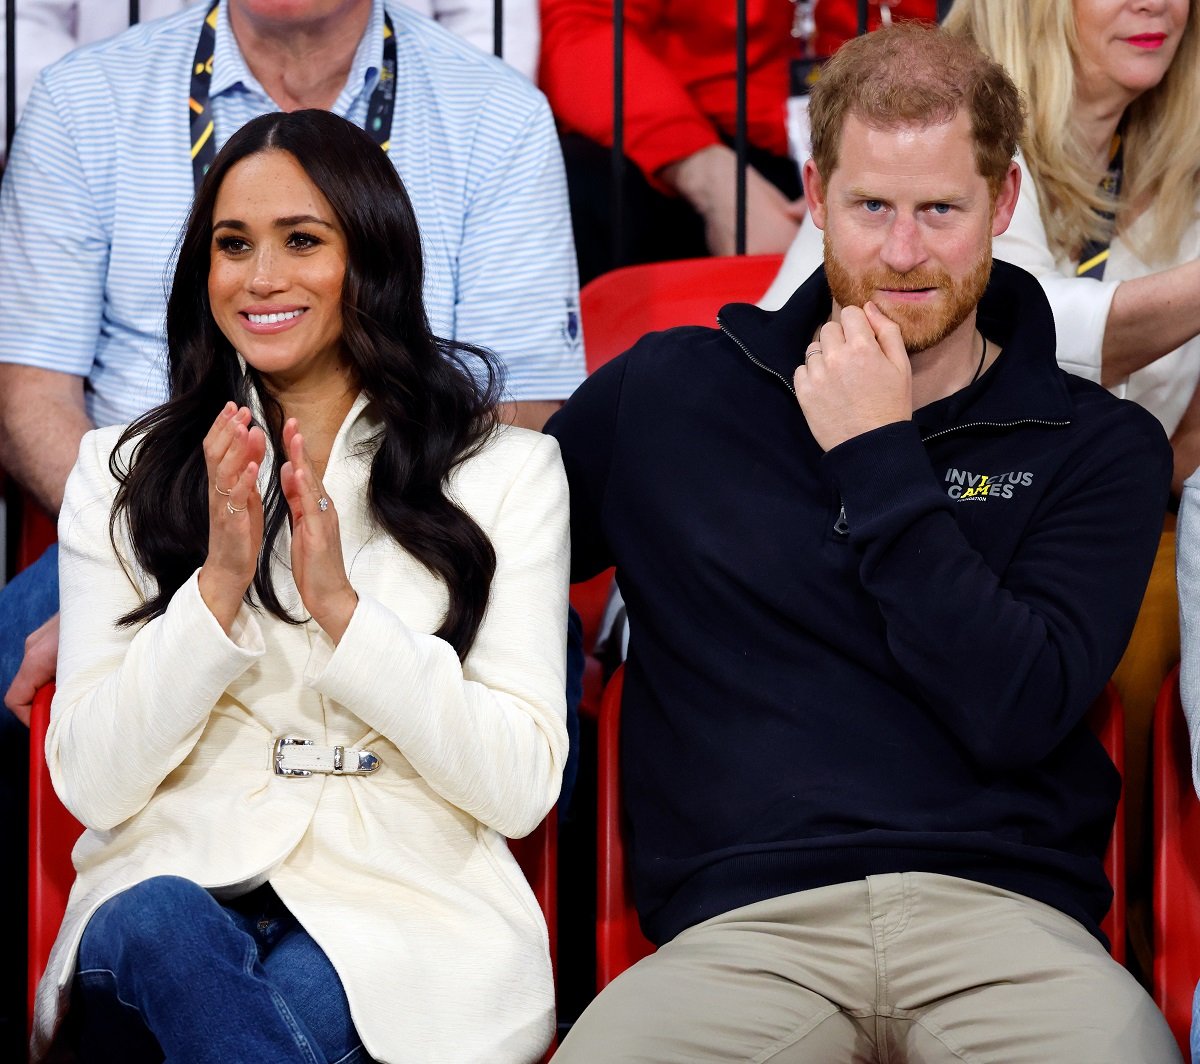 Prince Harry and Meghan Markle watch a seated volleyball competition at Invictus Games